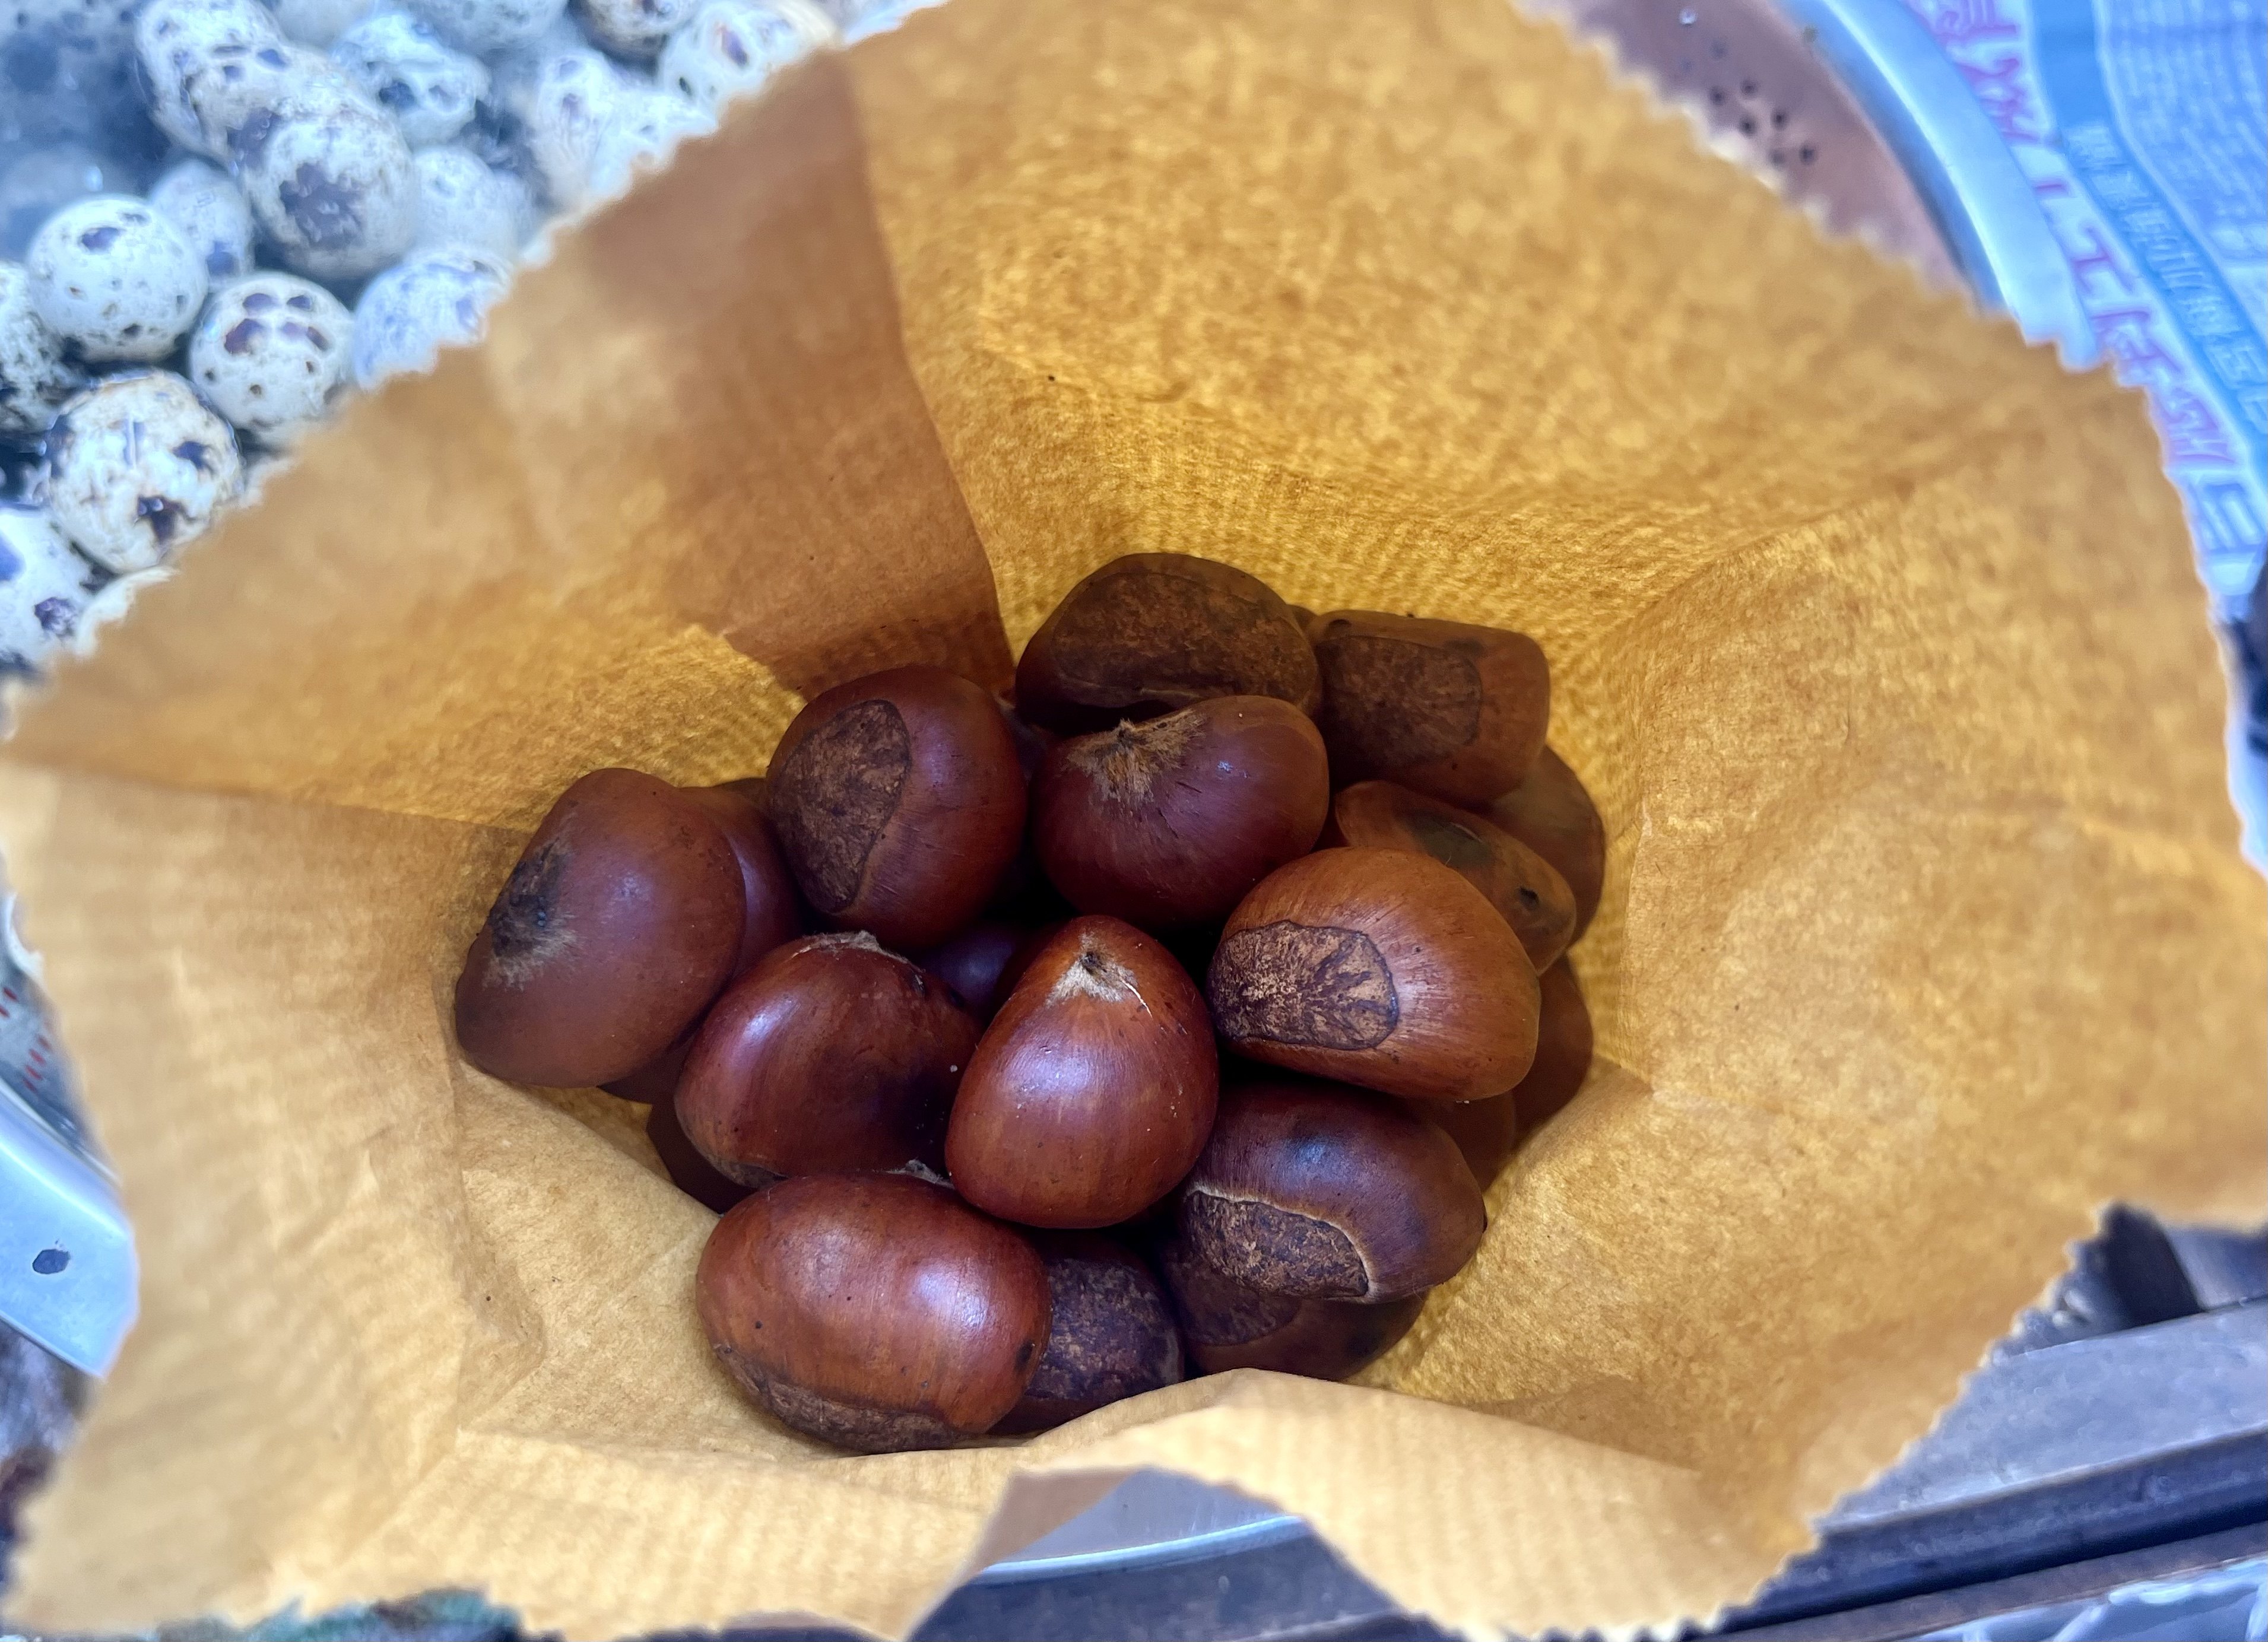 Hong Kong Street Food Roasted Chestnuts In Chinese Brass Pan Or Wok On A  Stove Over Hot Black Stone Stock Photo - Download Image Now - iStock